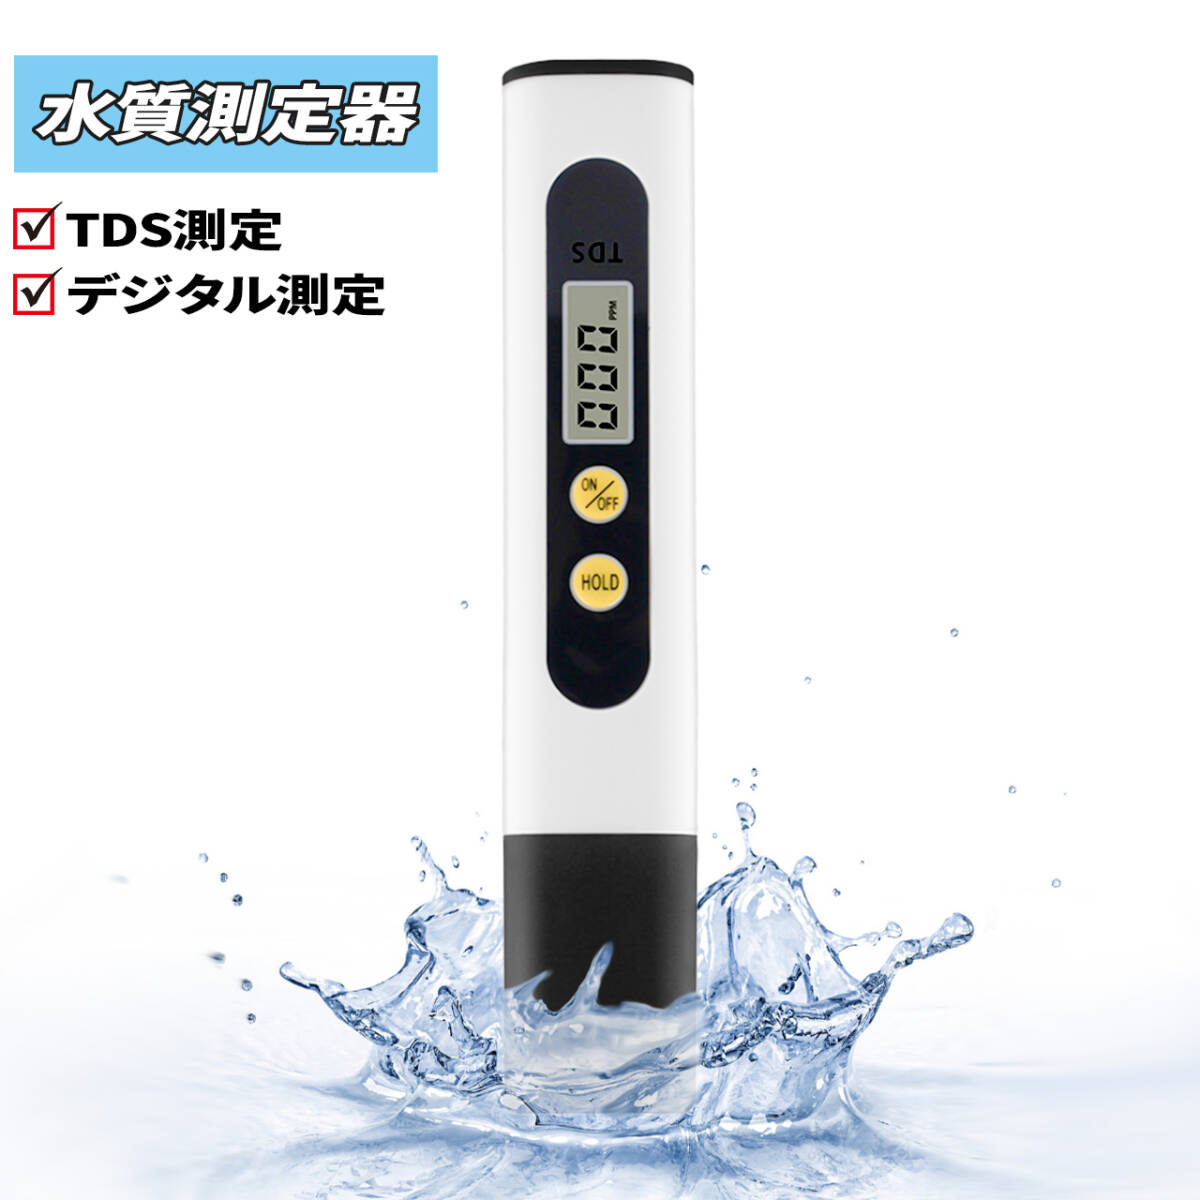 TDS meter coffee concentration etc.. measurement . digital water quality measuring instrument water quality inspection kit control number 786